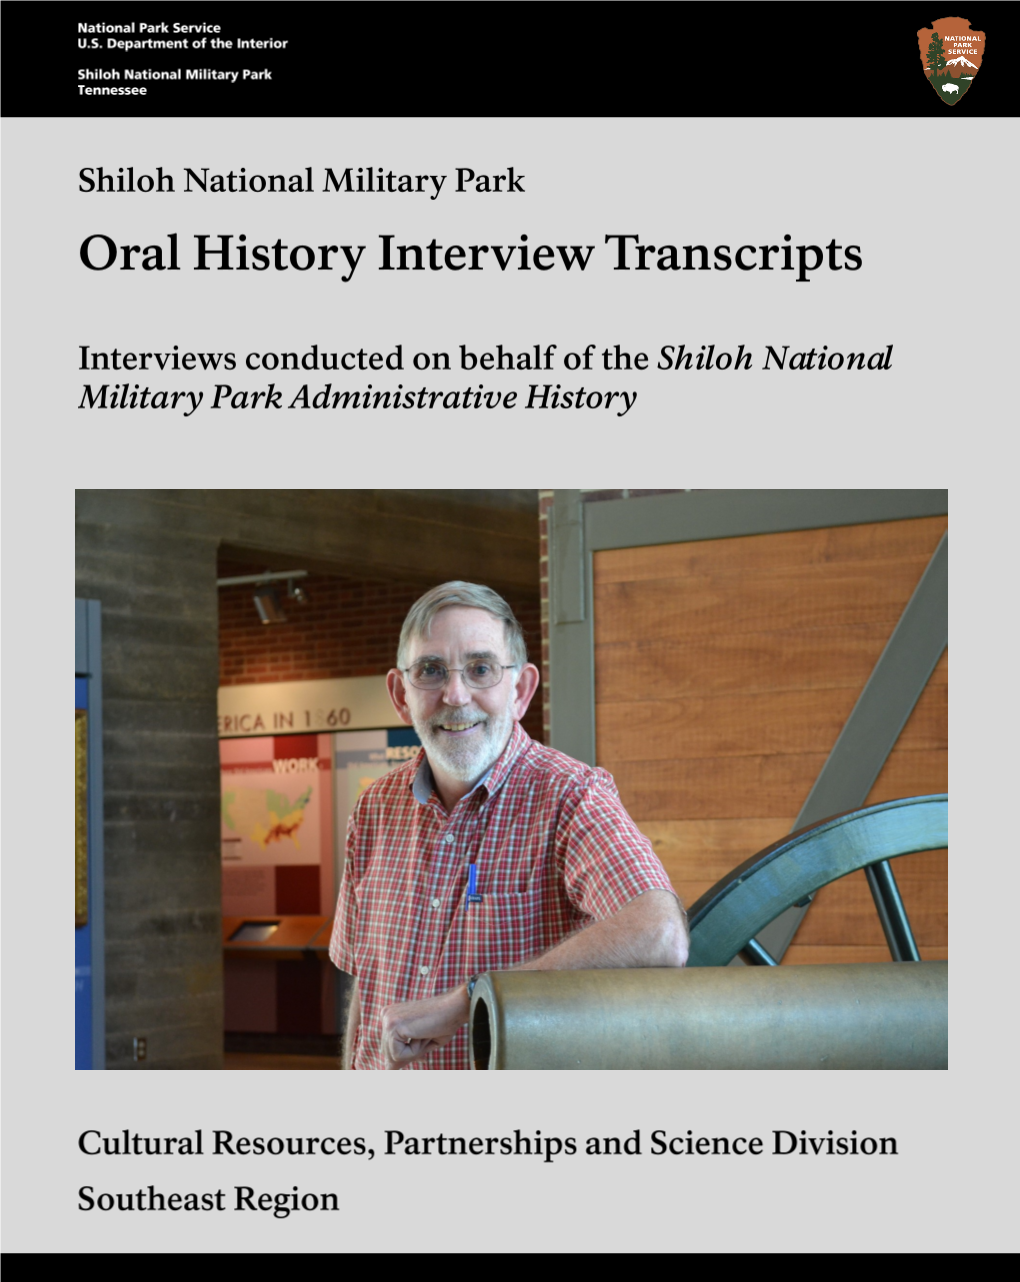 Interview on Behalf of Shiloh National Military Park Administrative History